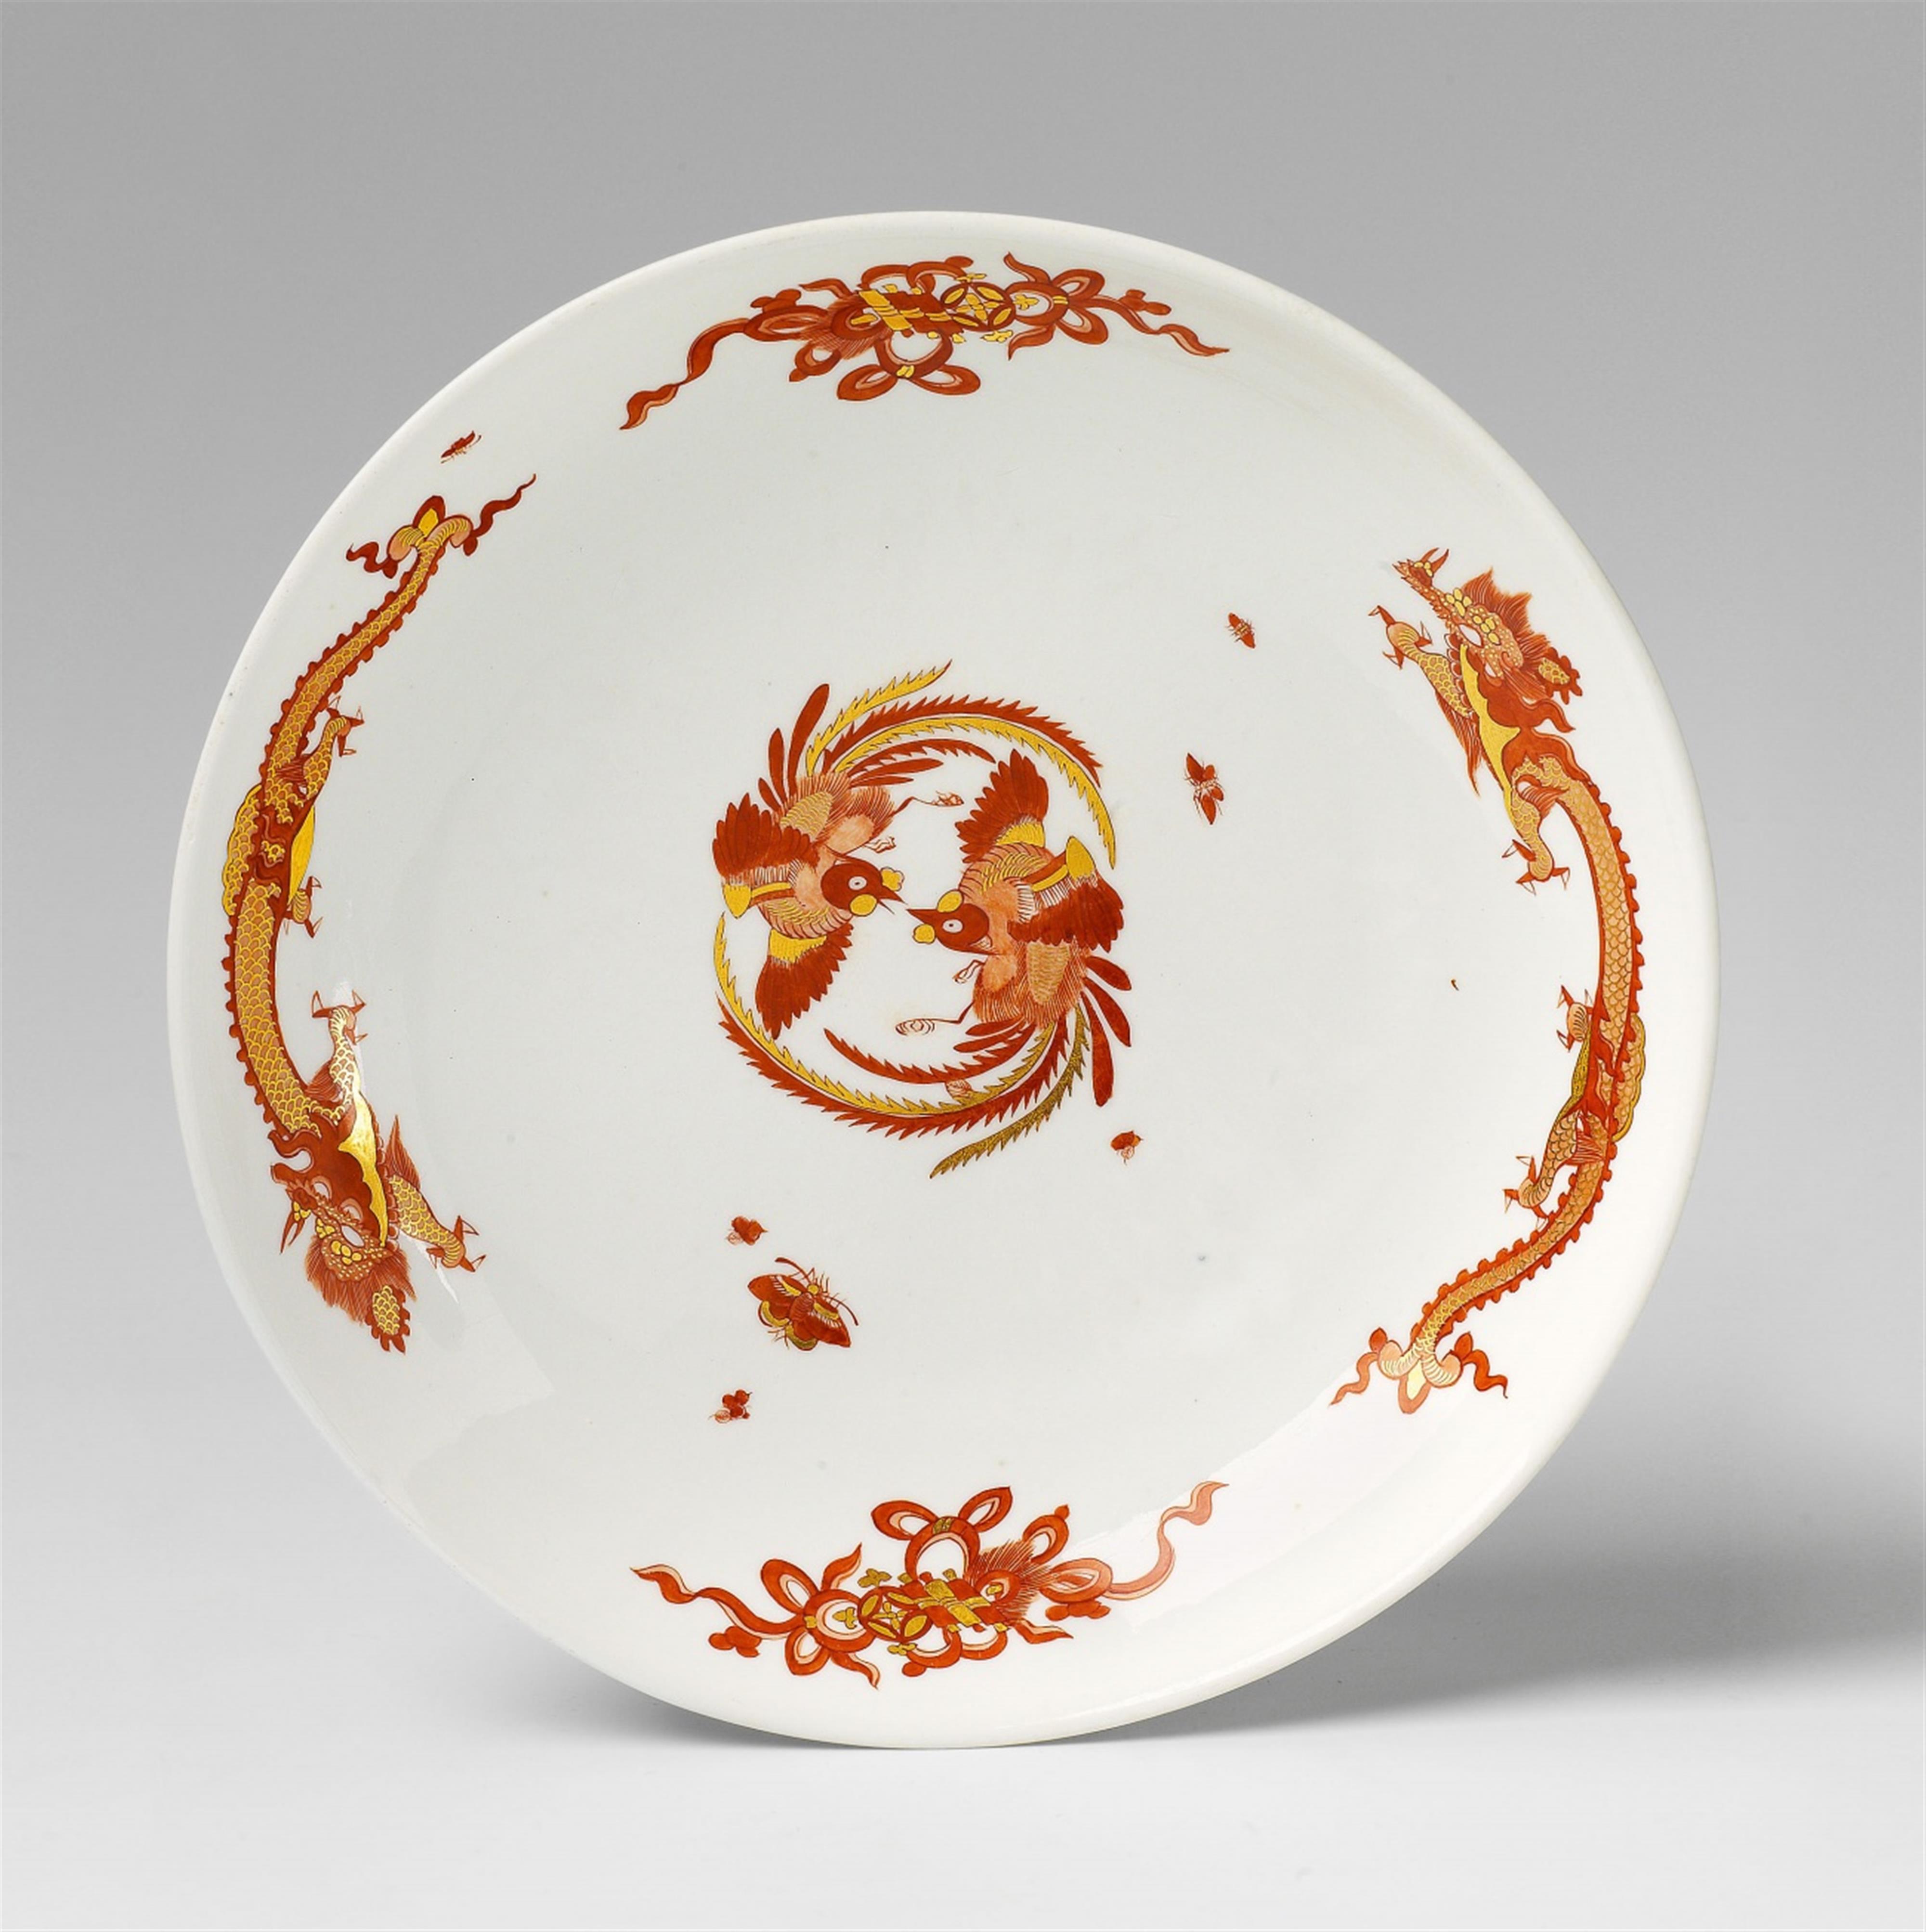 A Meissen porcelain platter made for the royal court patisserie - image-1